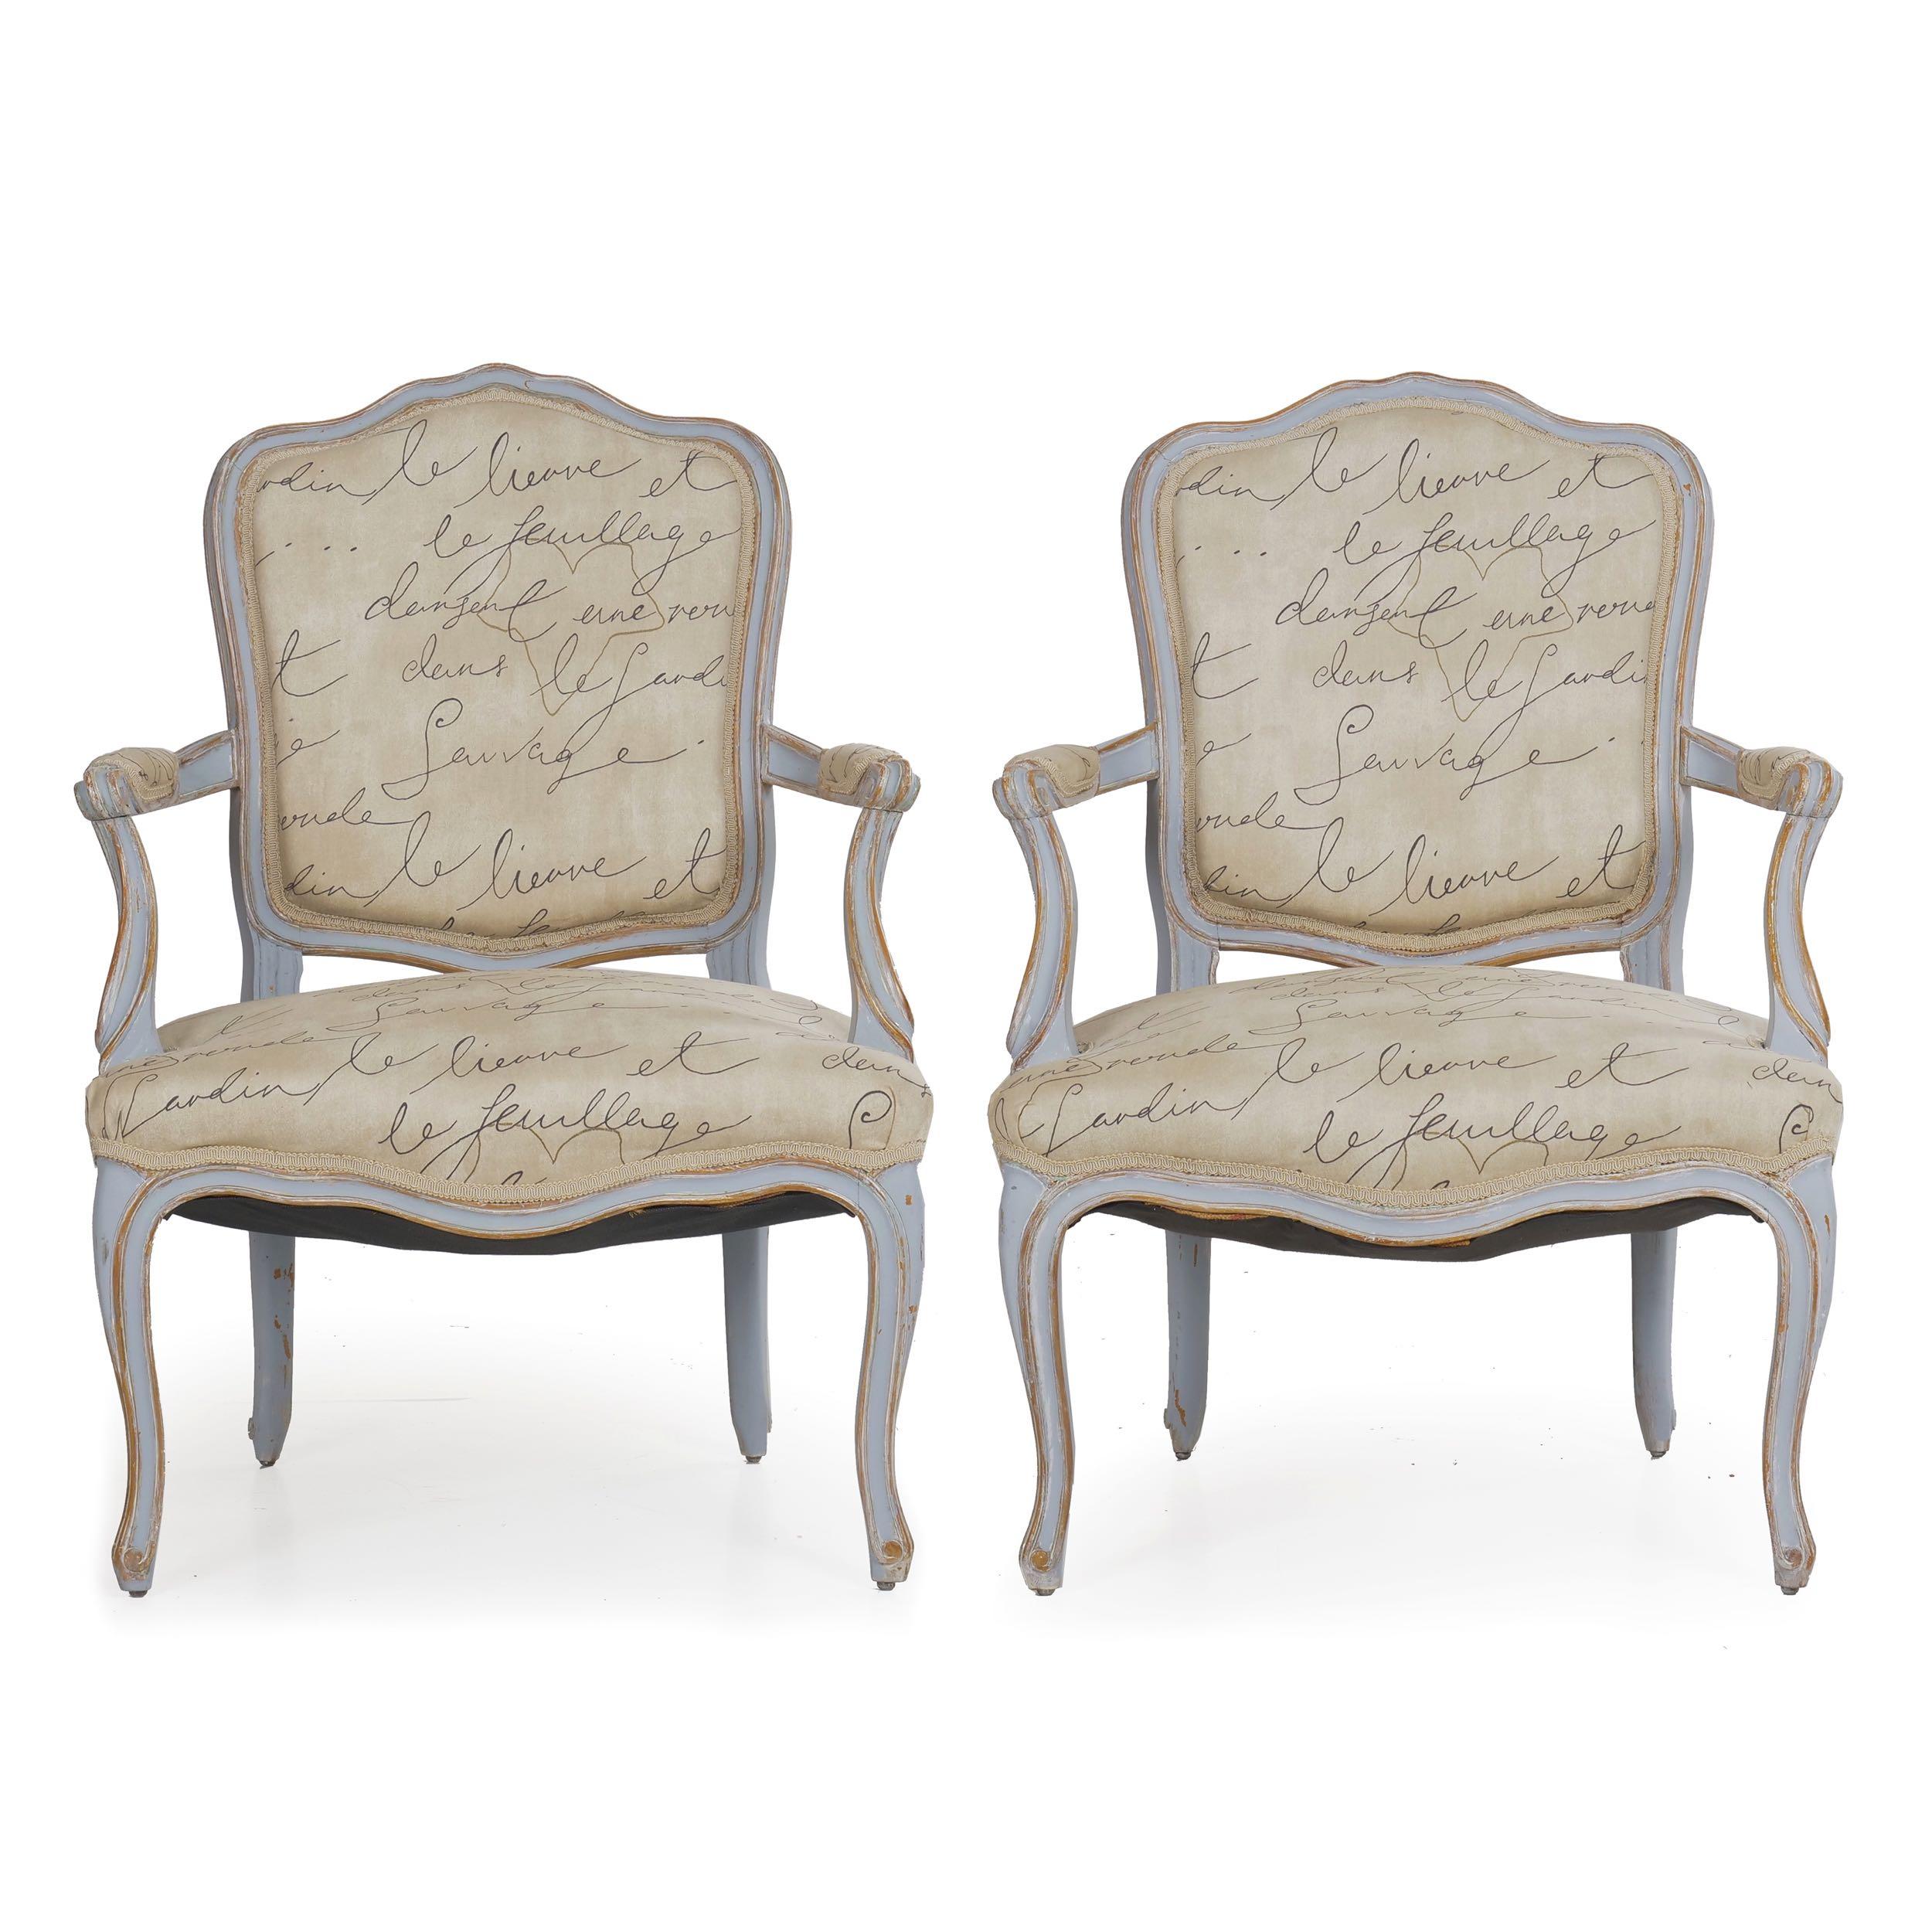 Vintage pair of French armchairs,
circa 20th century
Item # 007FXJ30L  

An attractive pair of 20th century fauteuils styled in the Louis XV taste, they have a bright blue painted finish with natural and faux distressing throughout the frames.